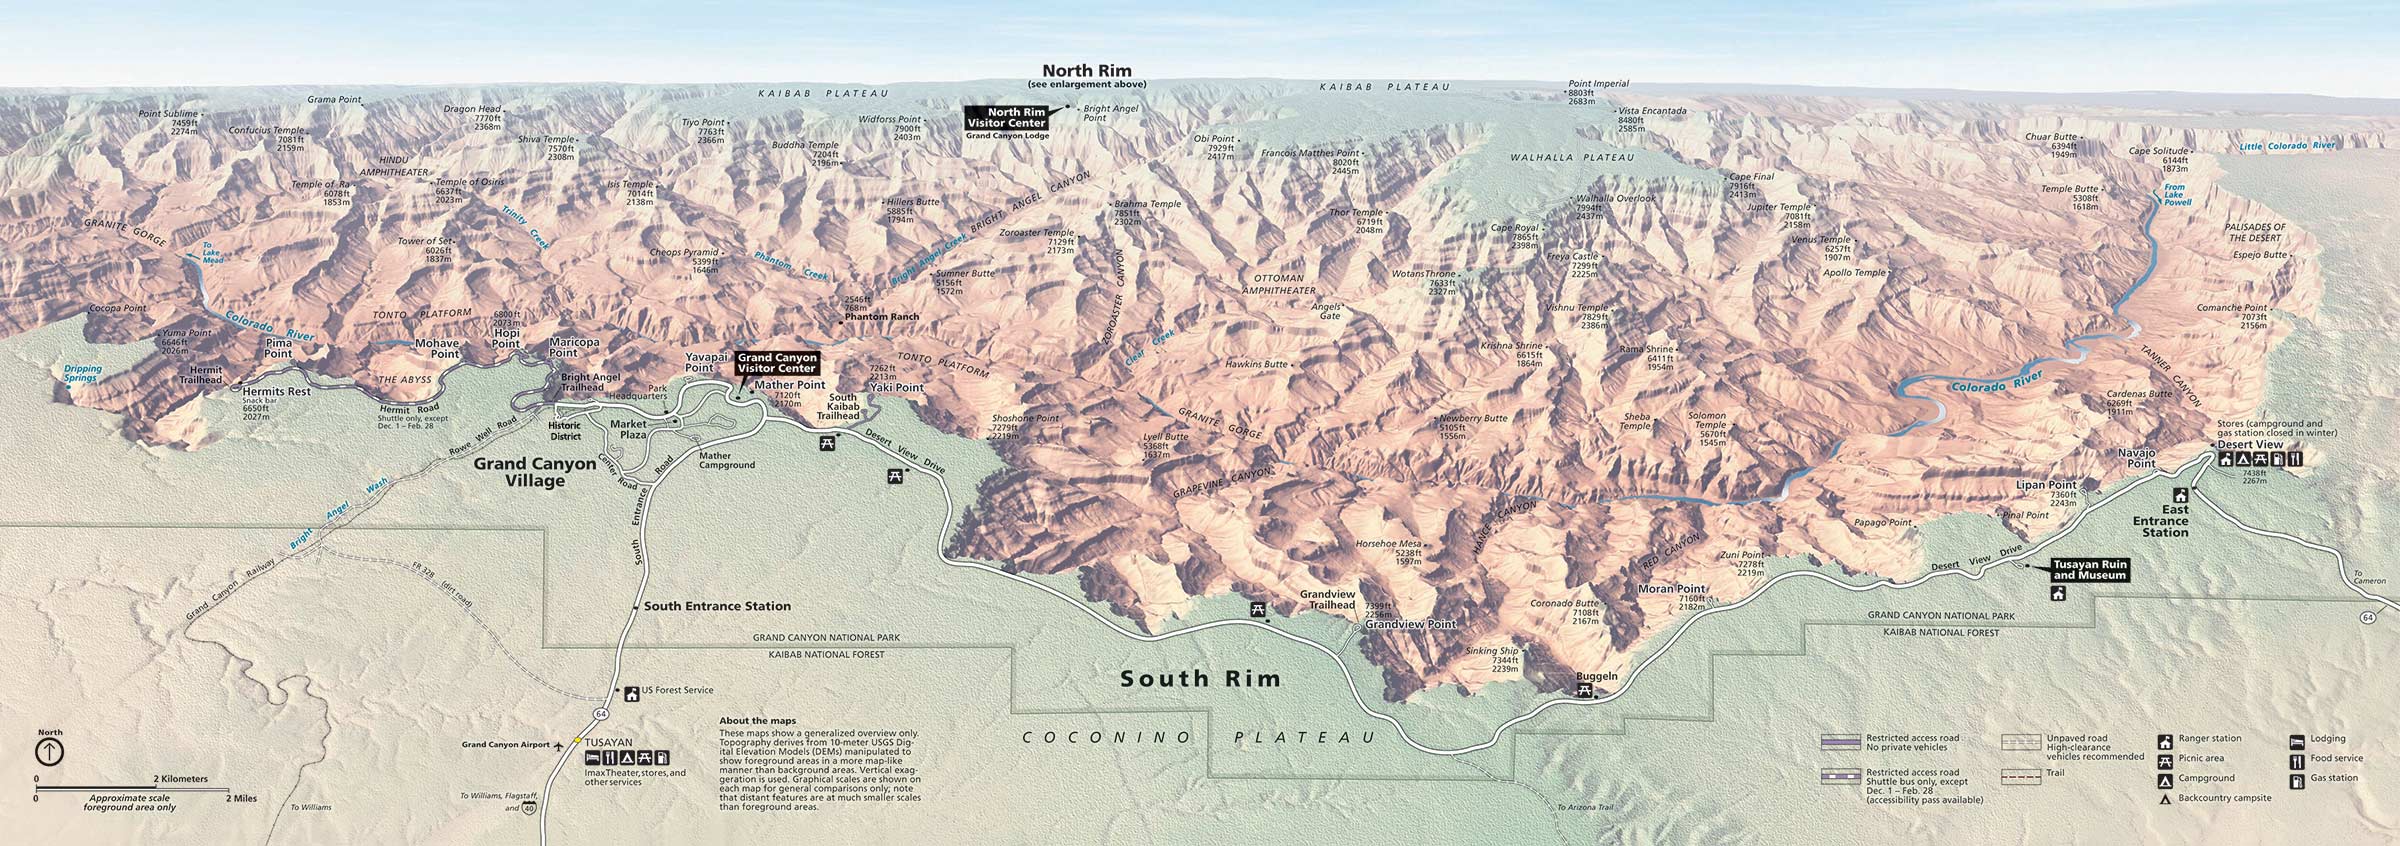 Map To Grand Canyon Maps   Grand Canyon National Park (U.S. National Park Service)